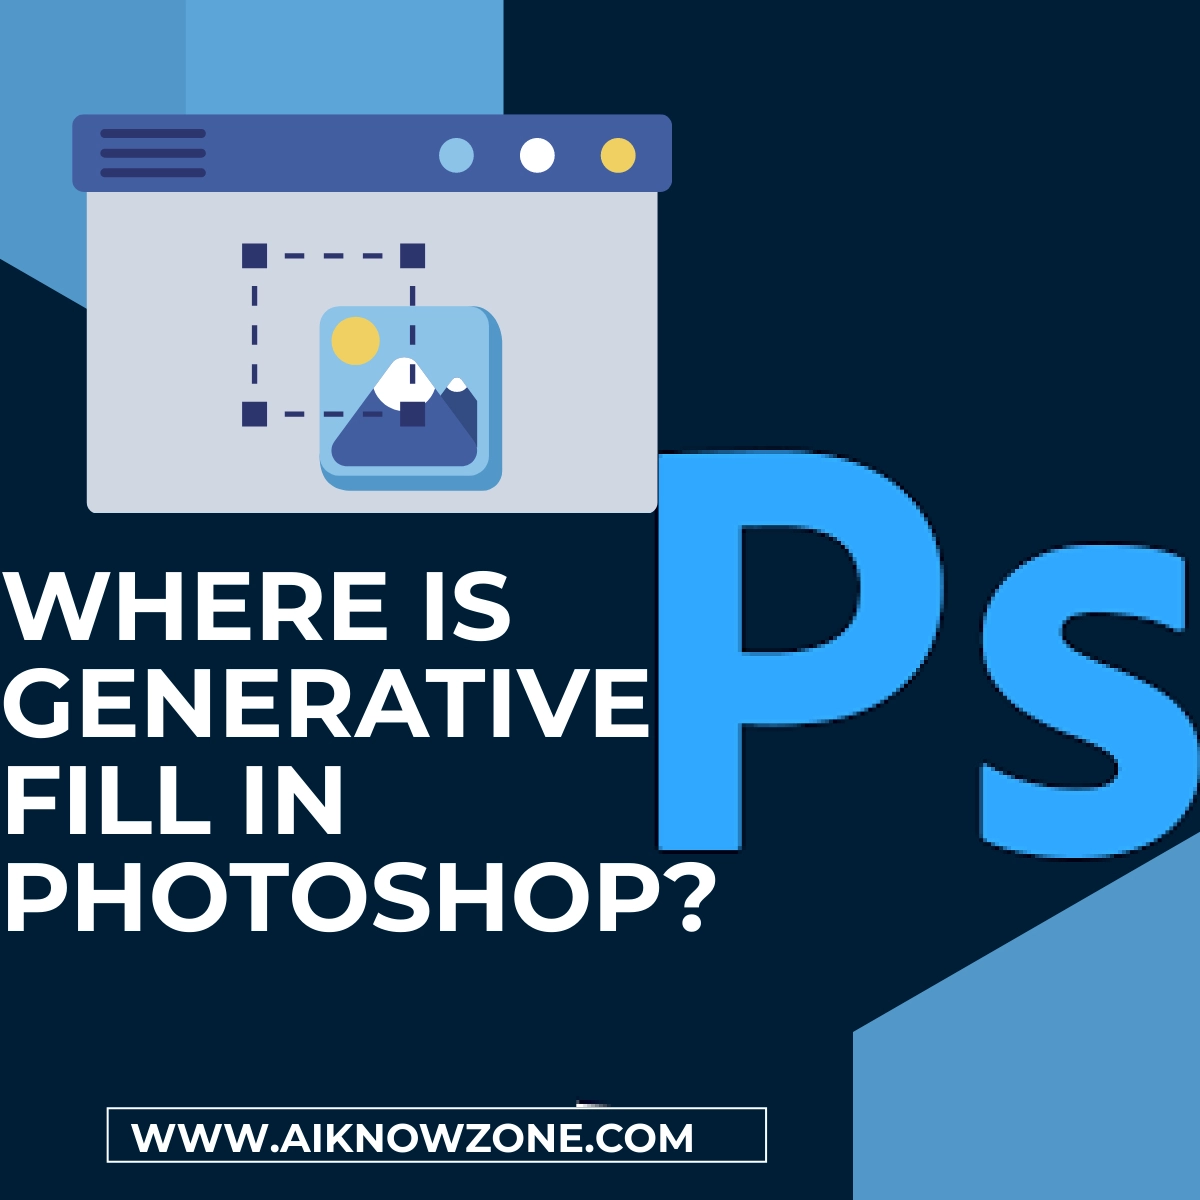 Where is Generative Fill in Photoshop?